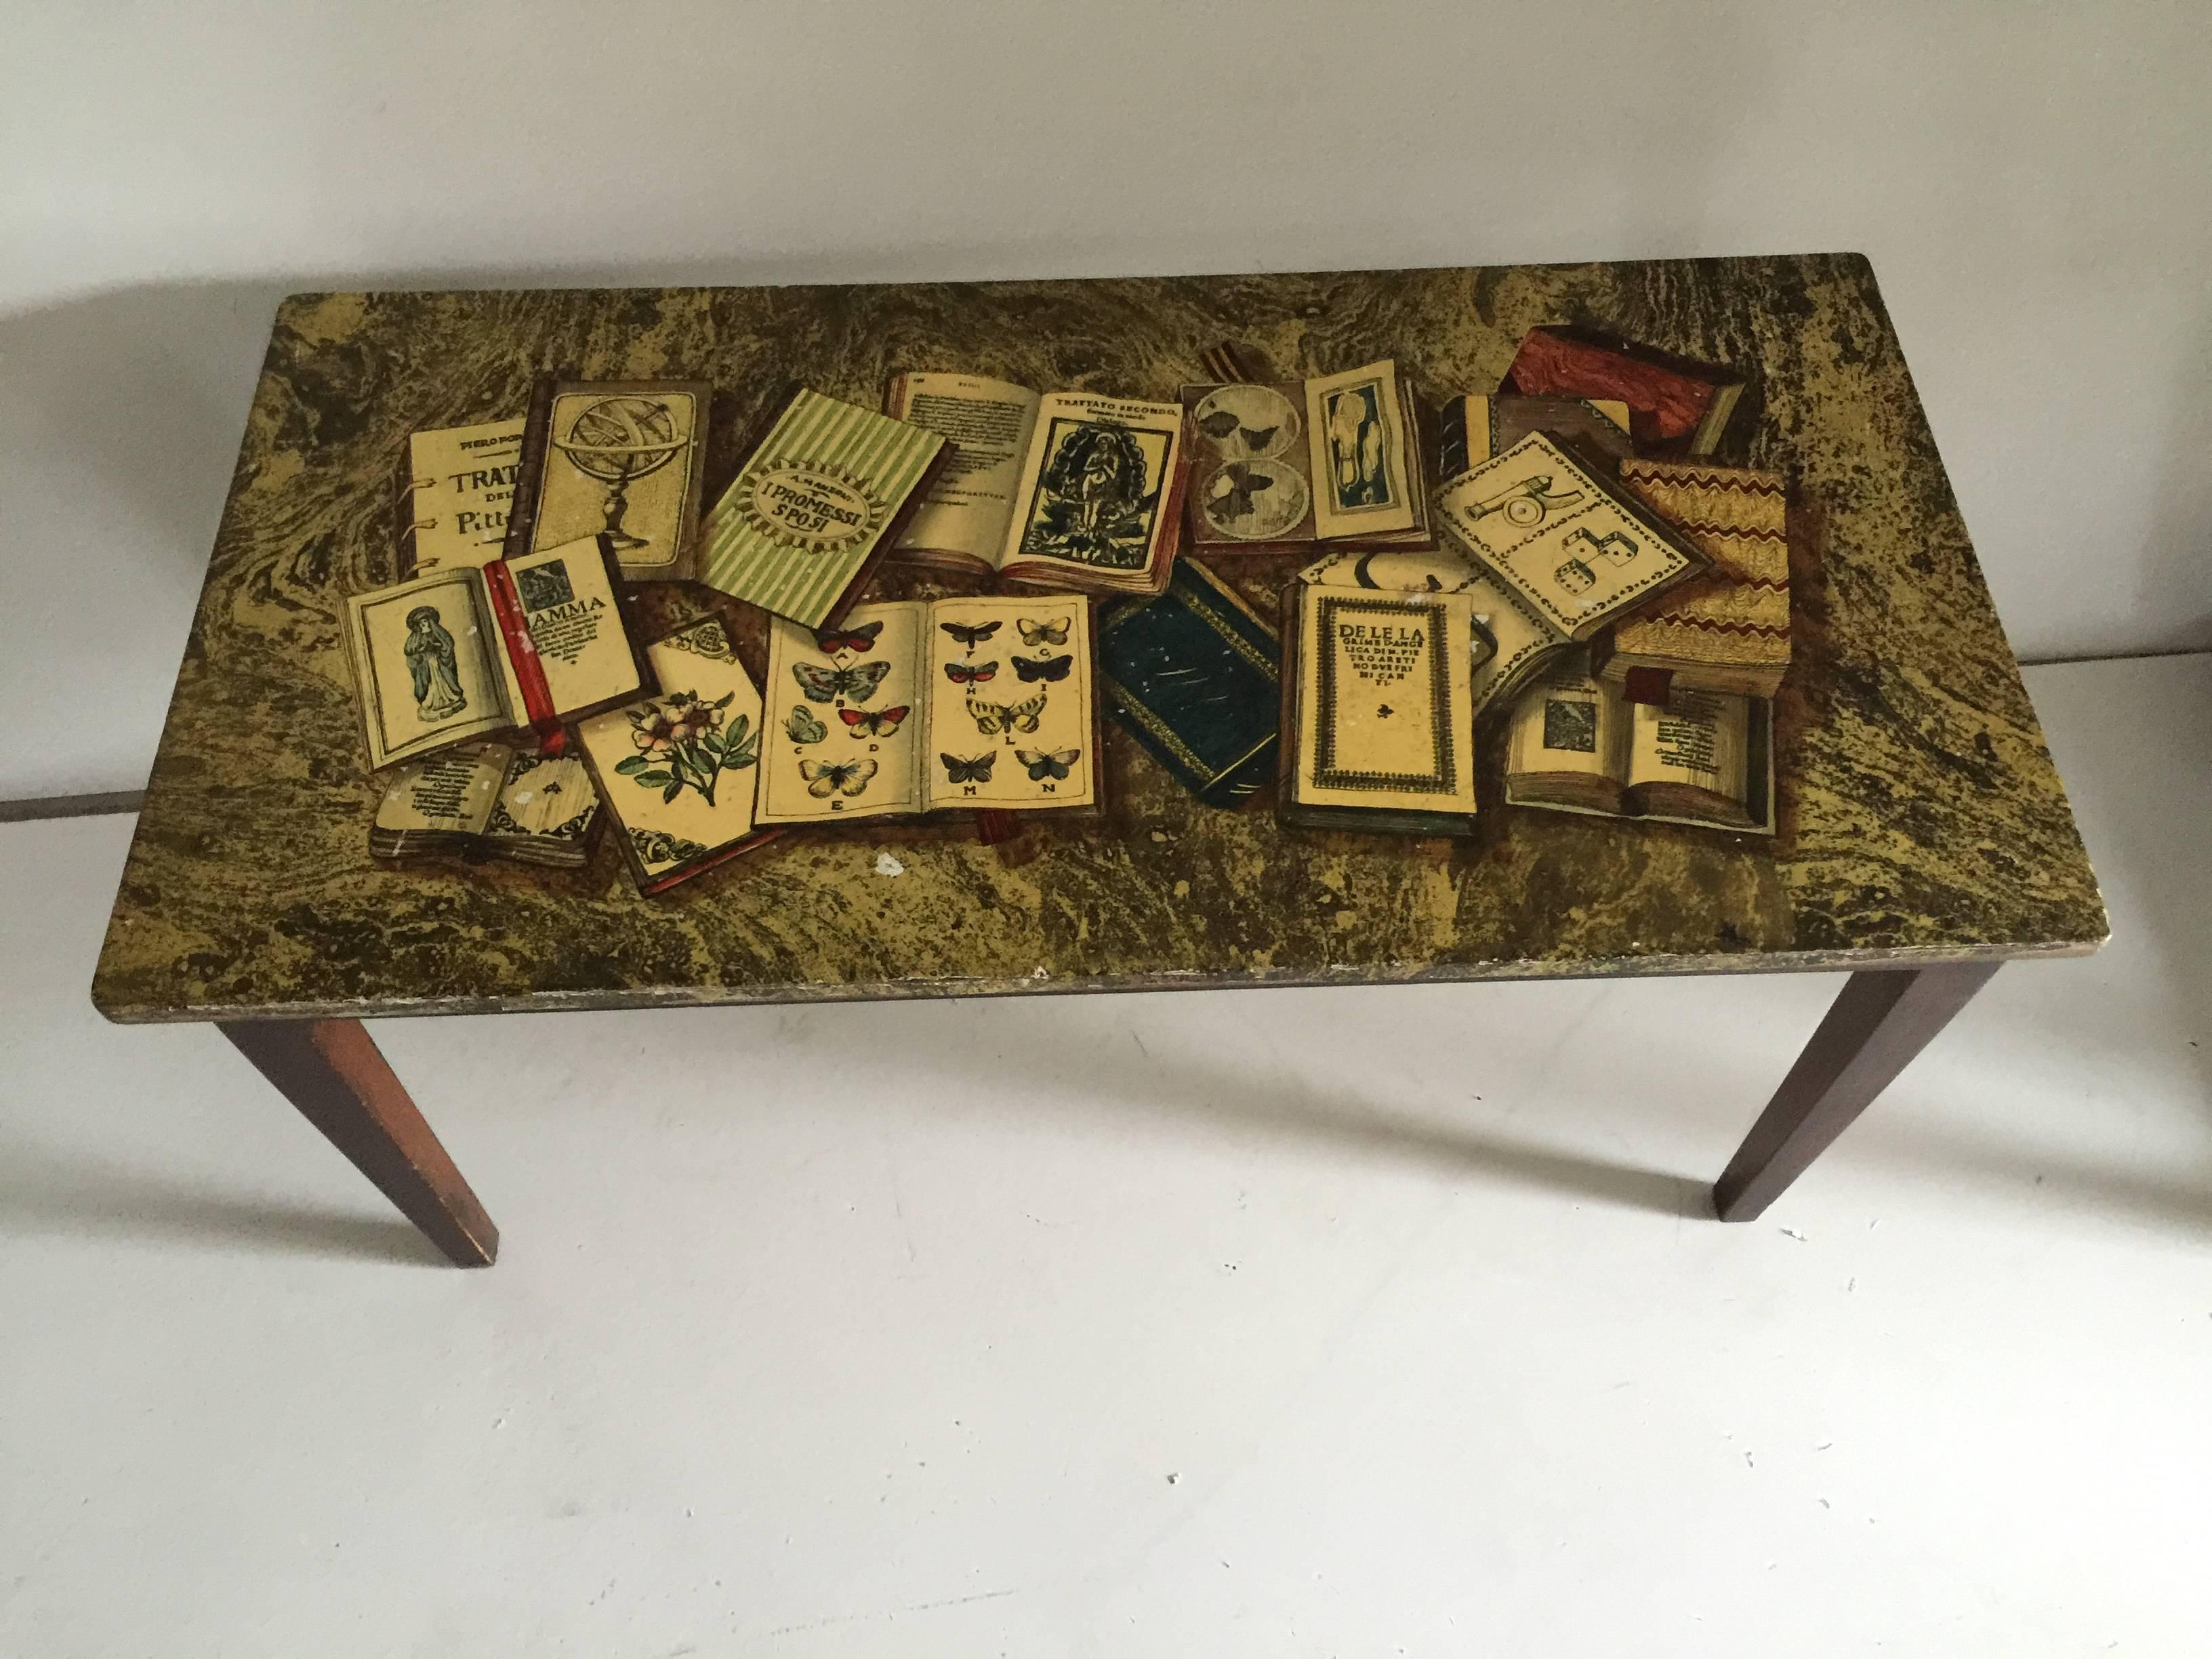 A Piero Fornasetti Libri coffee or cocktail table made in Italy, circa 1950s, decorated with books.